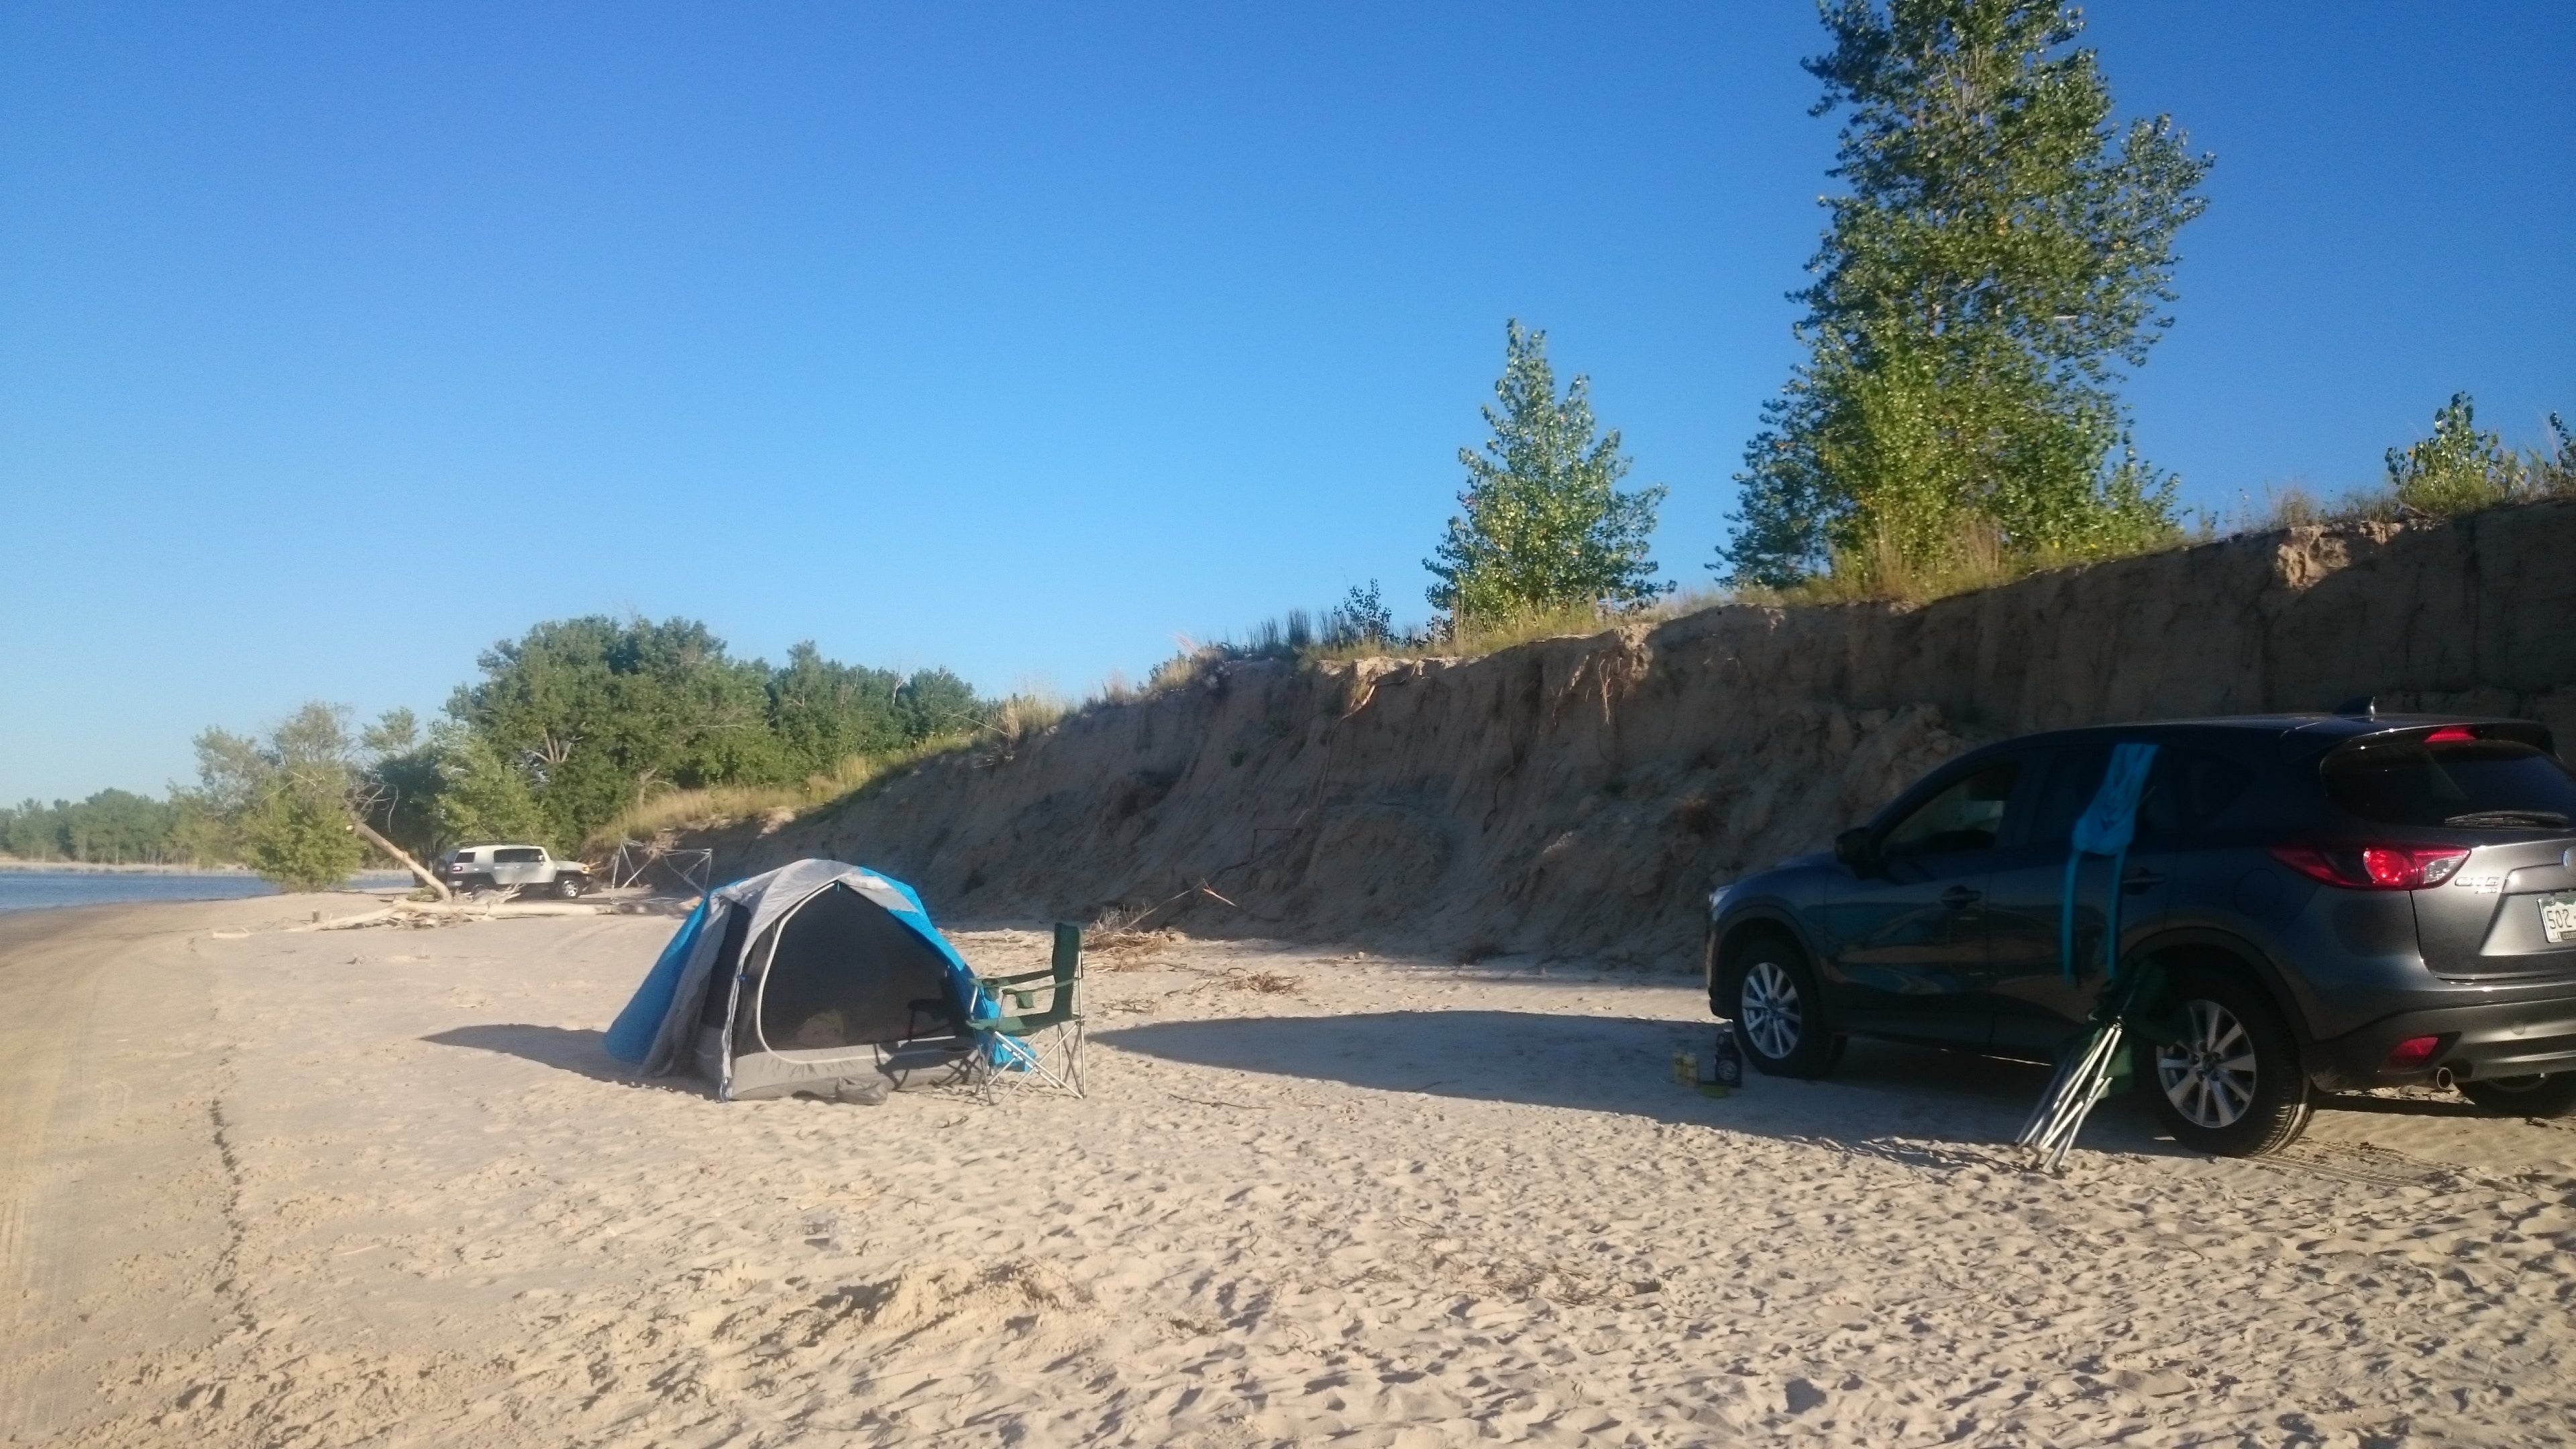 Camper submitted image from Martin Bay - Lake McConaughy SRA - 1